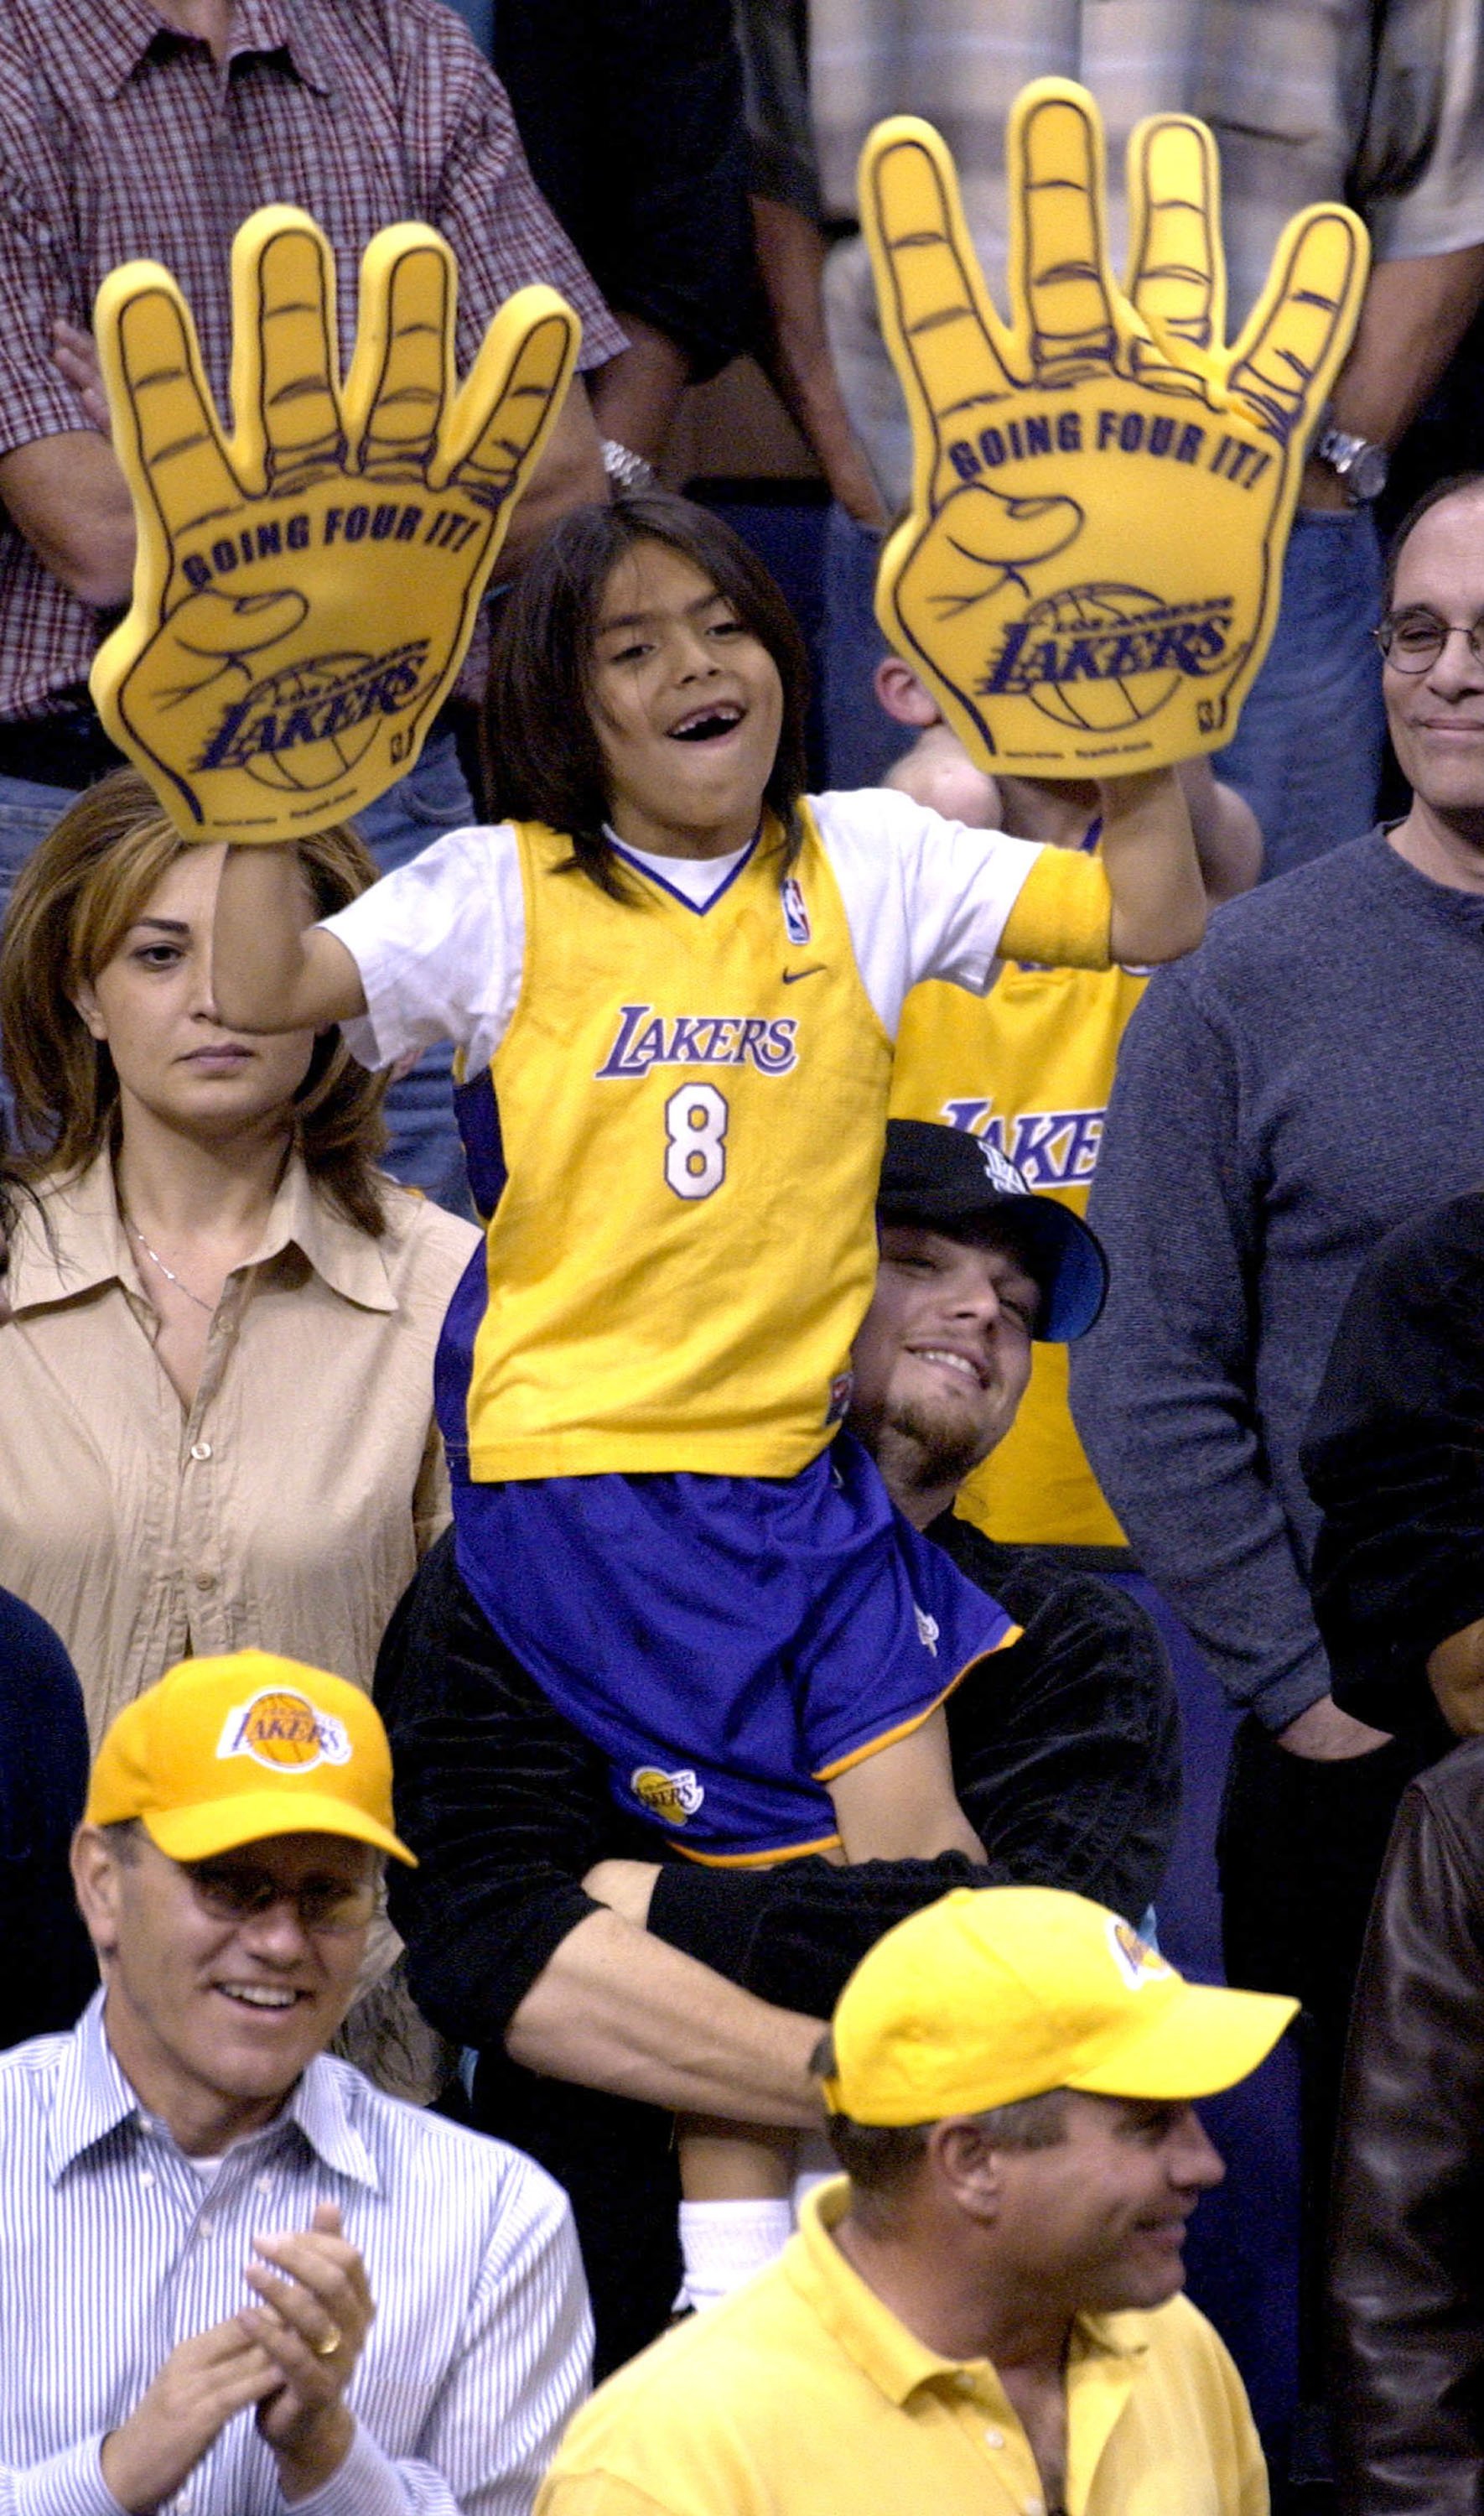 Leonardo DiCaprio holds up an unidentified child as they attend the Lakers v Timberwolves in Los Angeles | Source: Getty Images